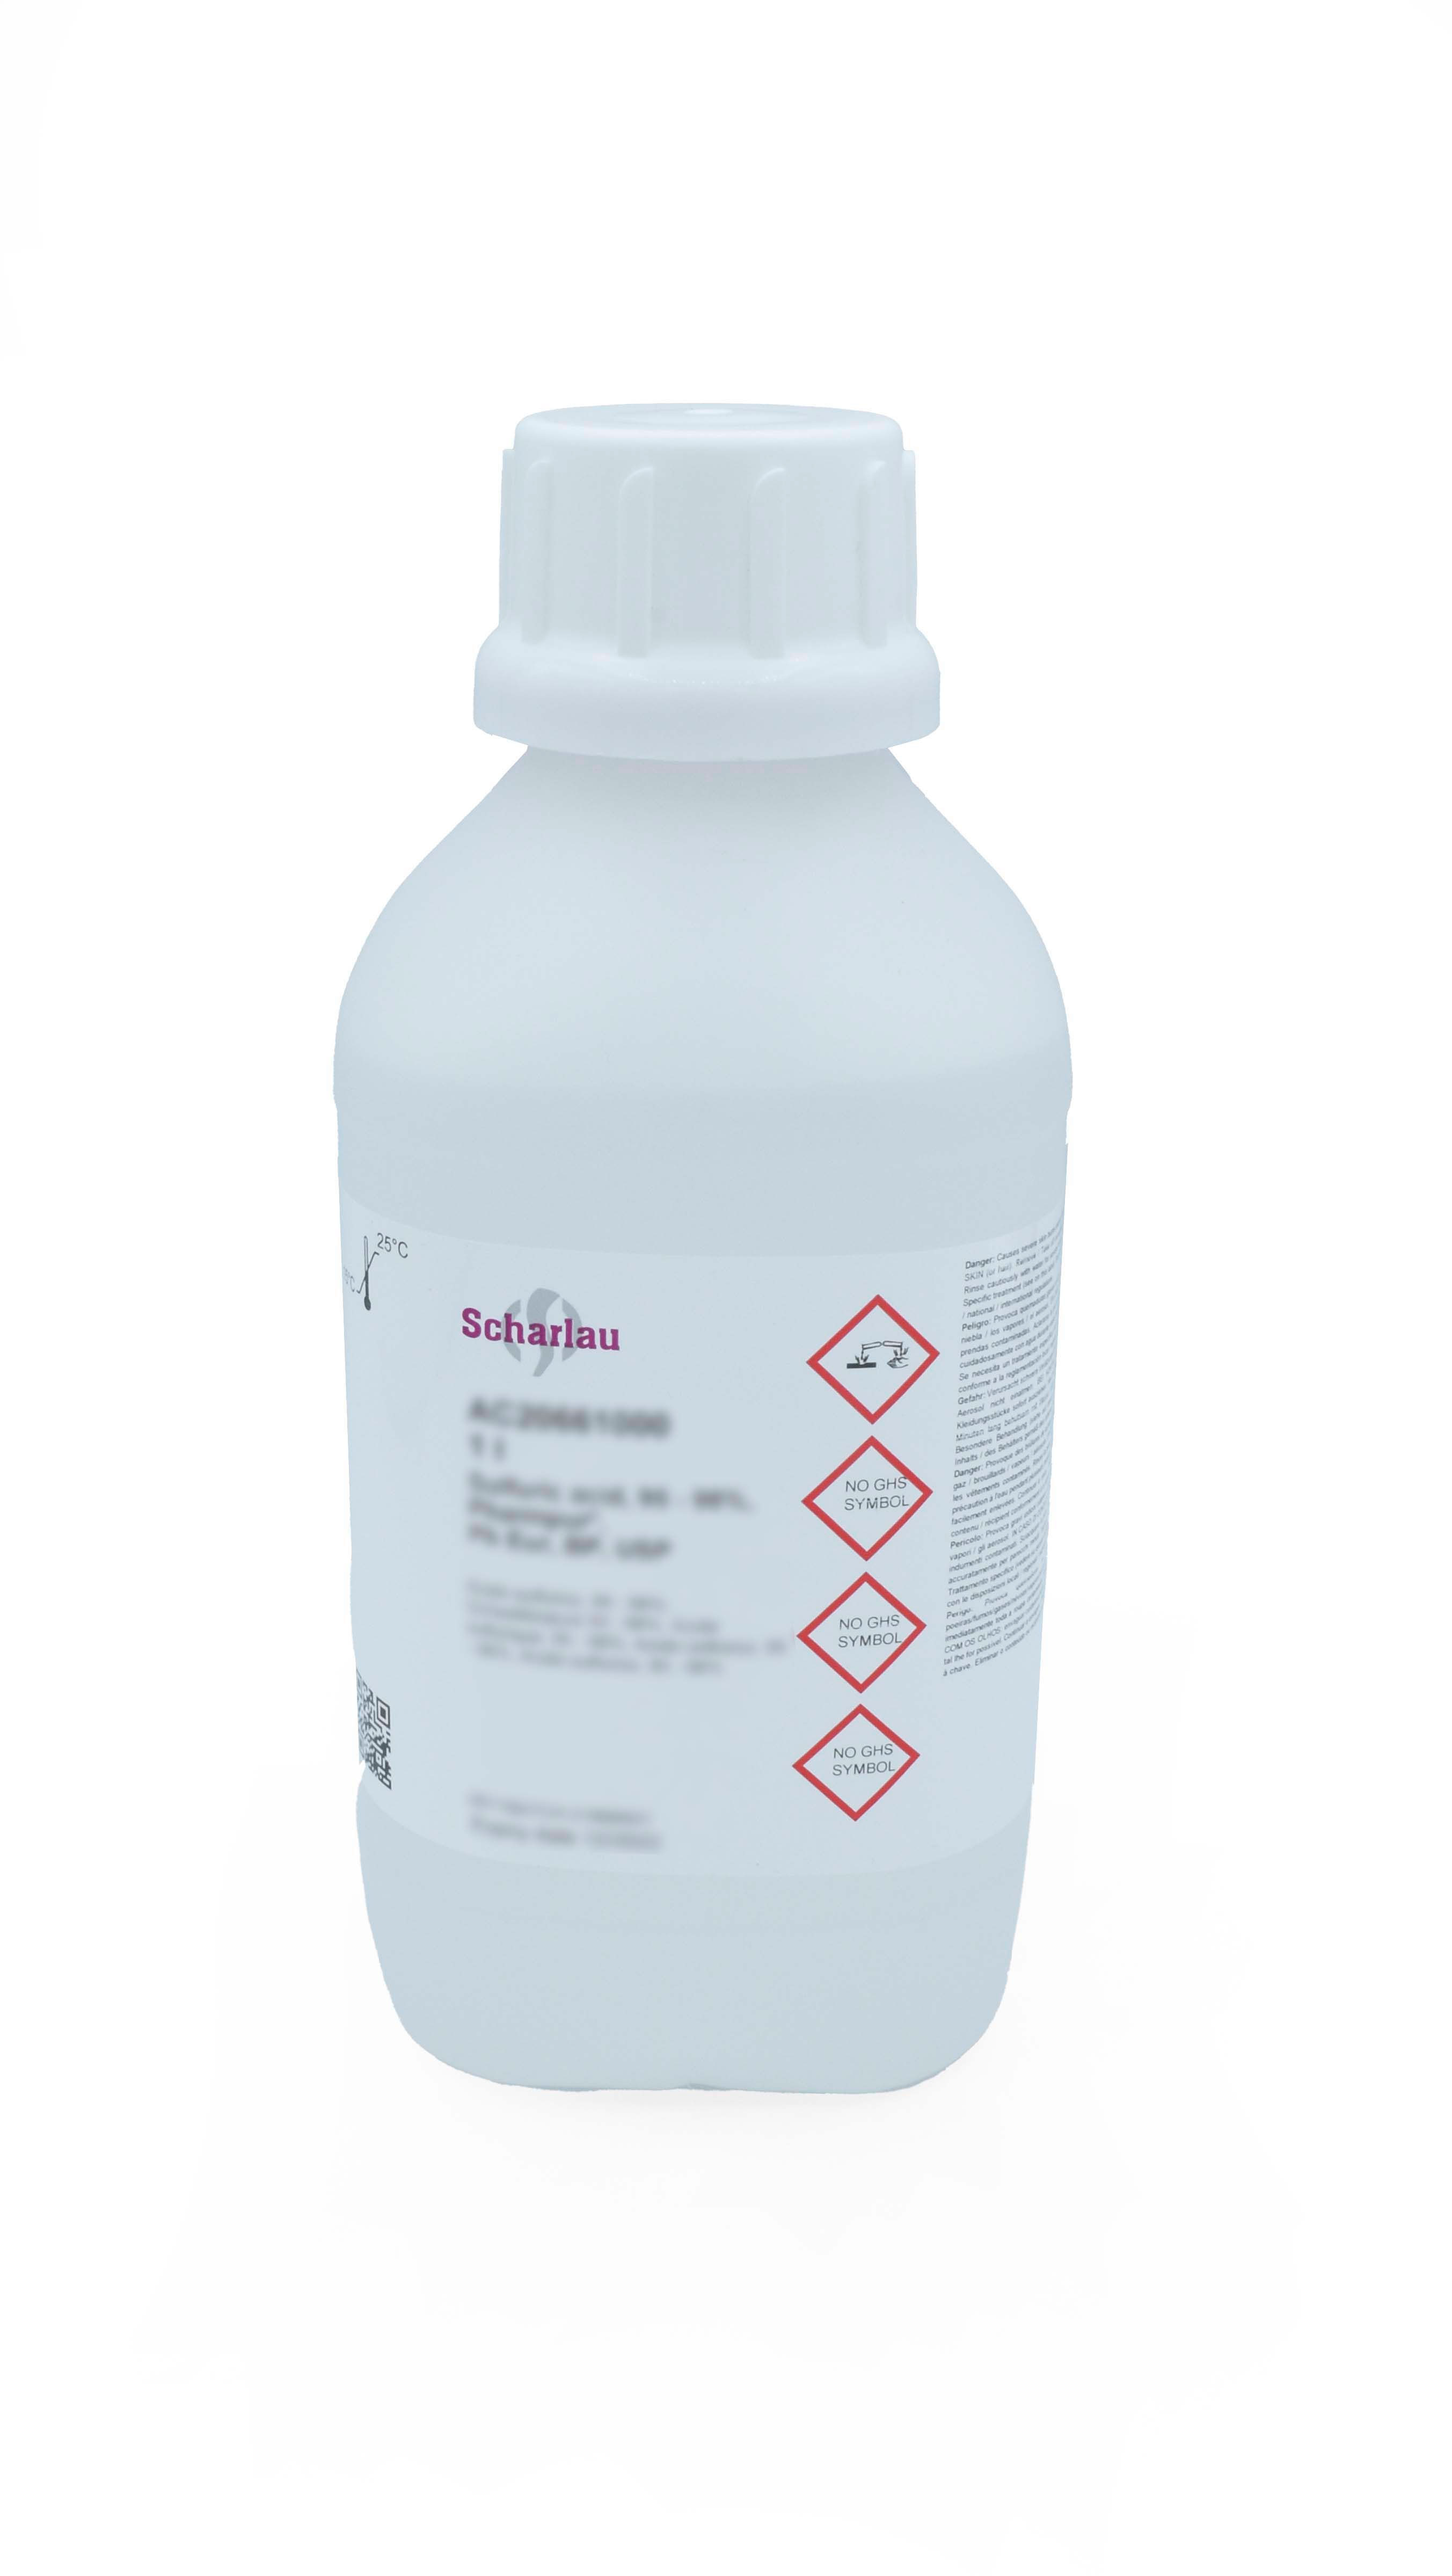 Sulfuric acid, solution 90 - 91% w/w, for Gerber fat determination and testing nitrates in milk, Sulphuric acid